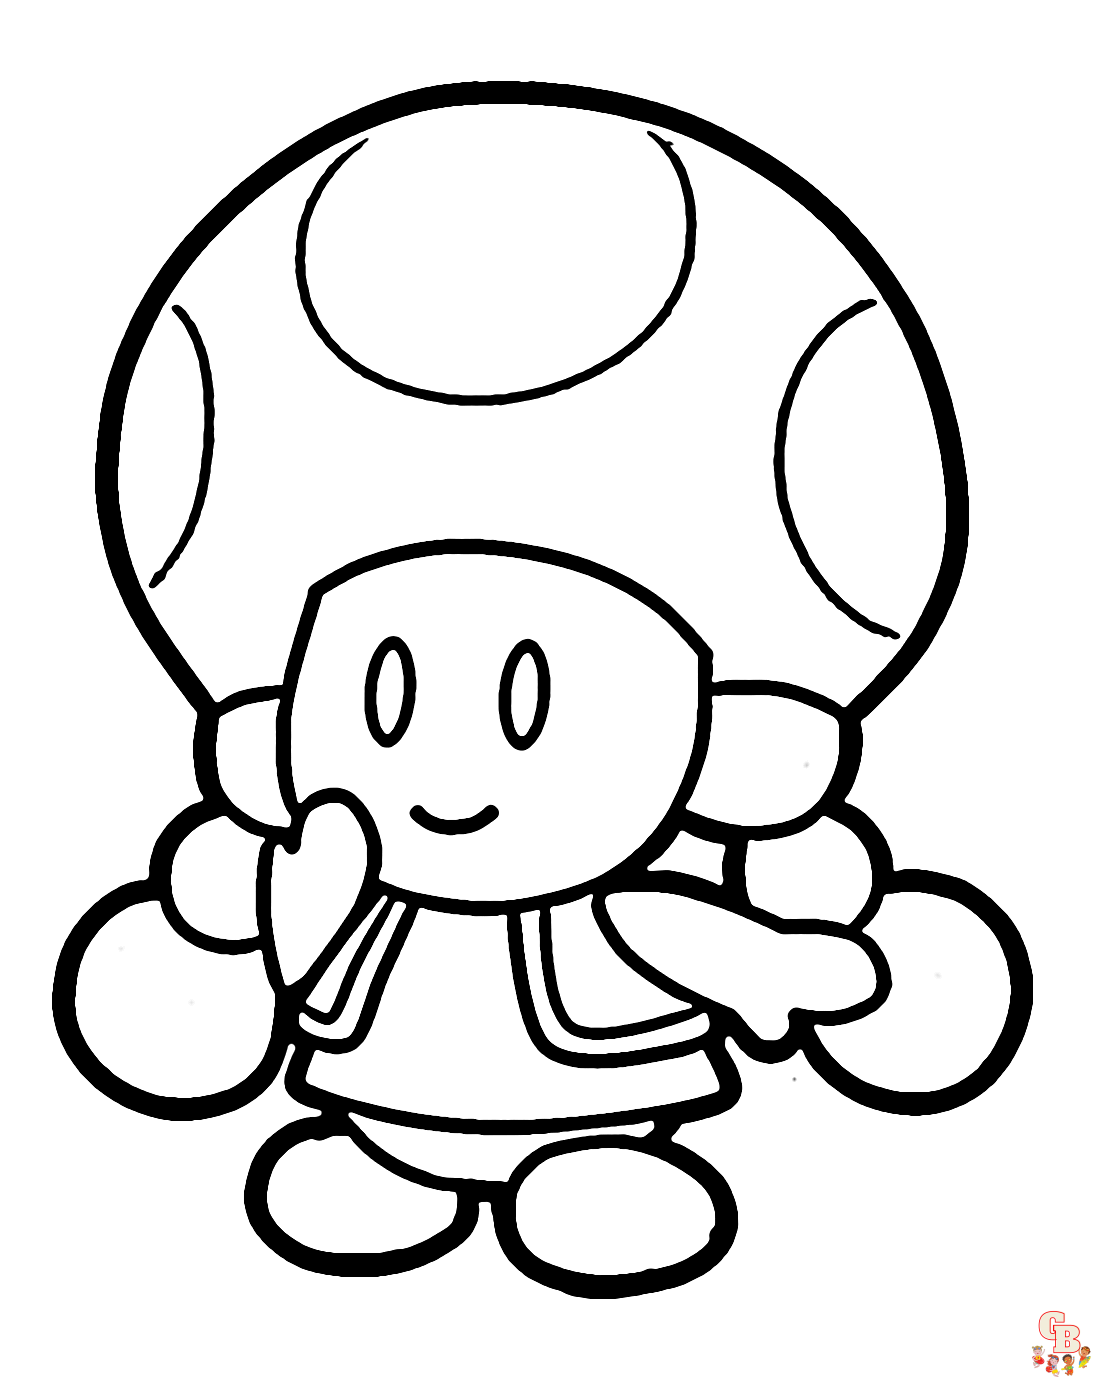 Printable toadette coloring pages free for kids and adults